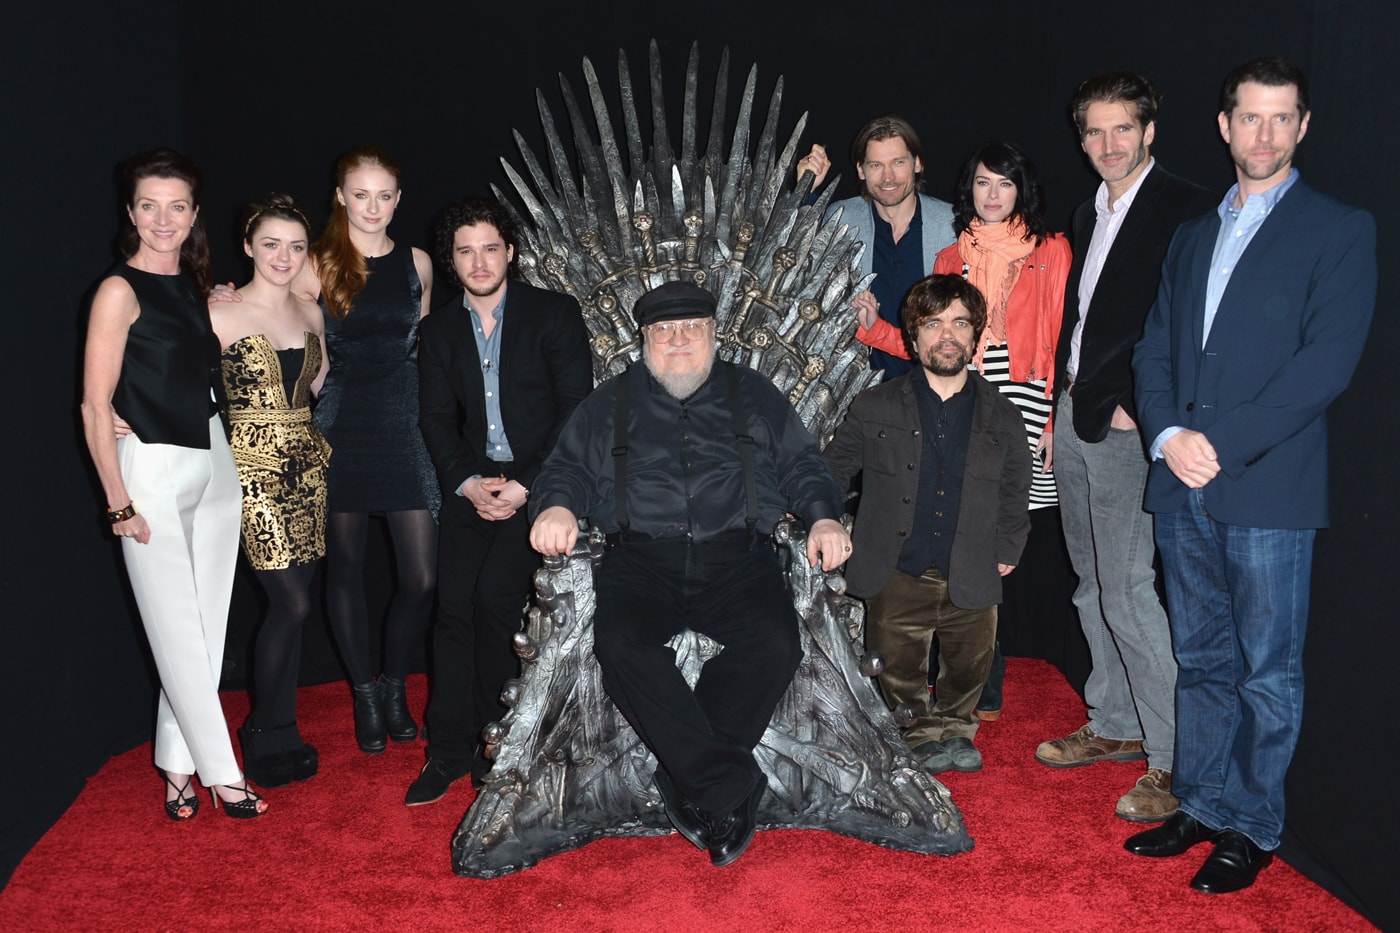 Game of Thrones': The Last Show We Watch Together?